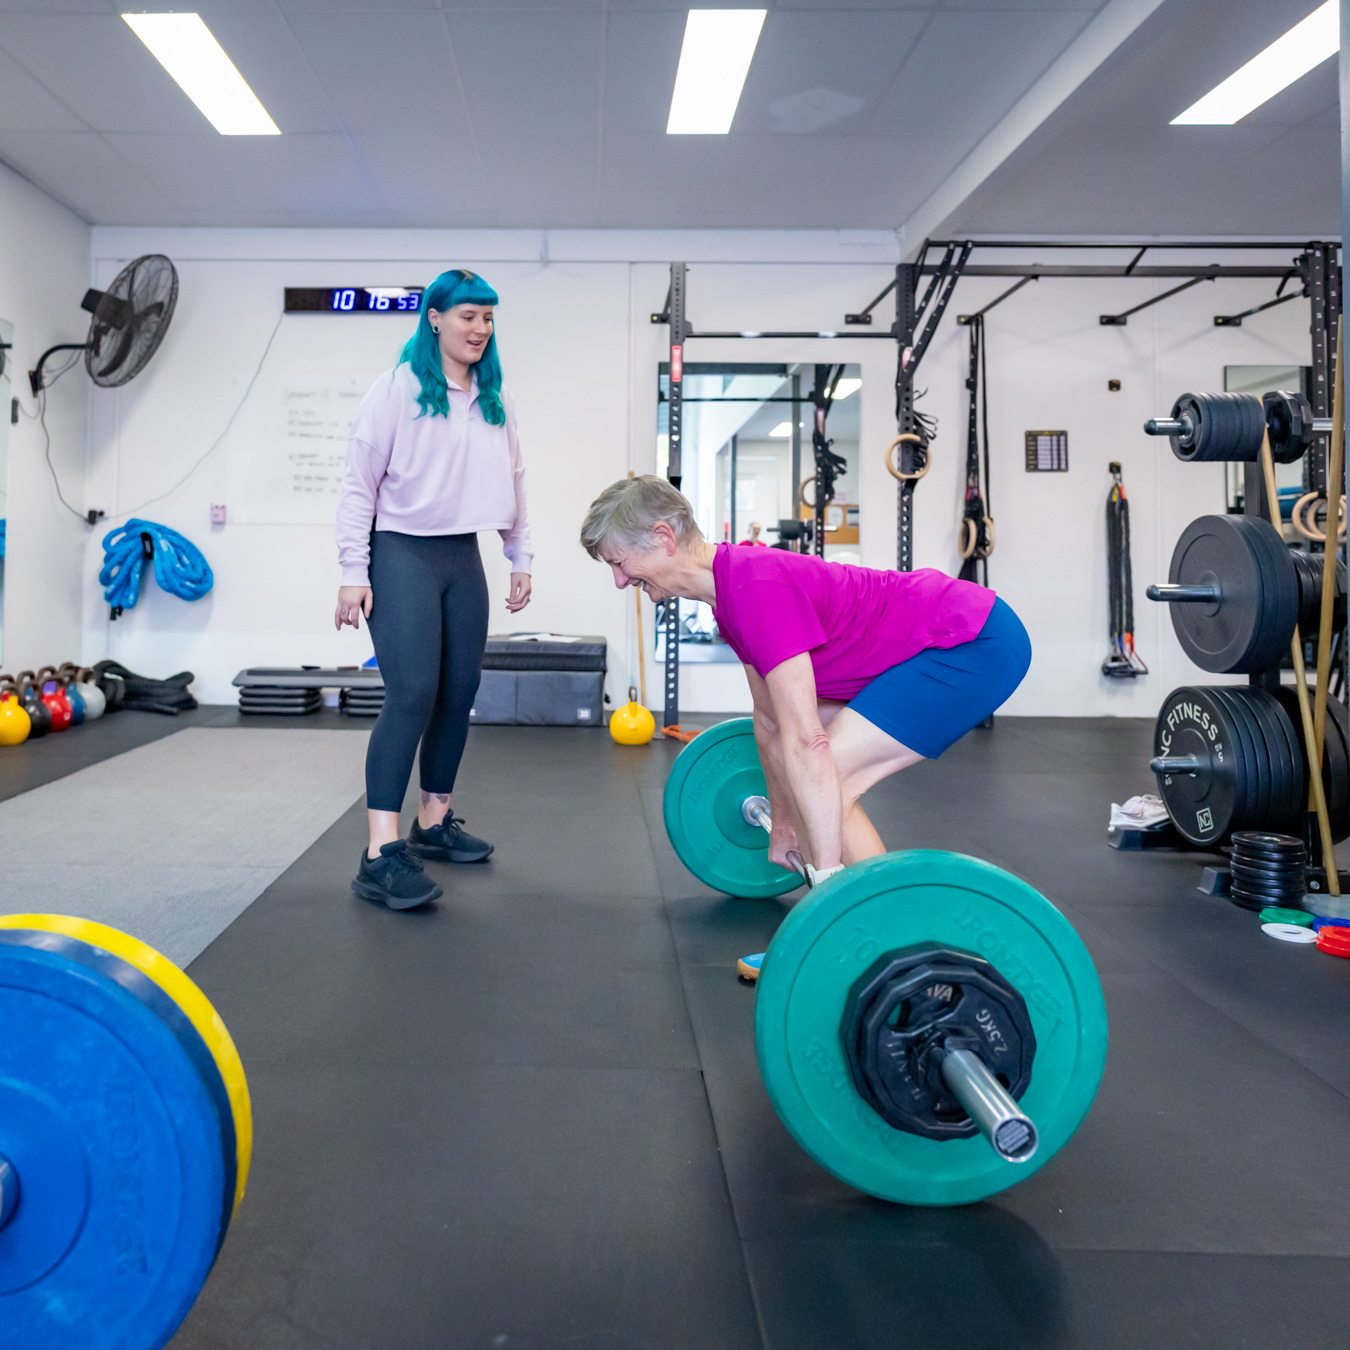 Woman deadlifting with help of Personal Trainer